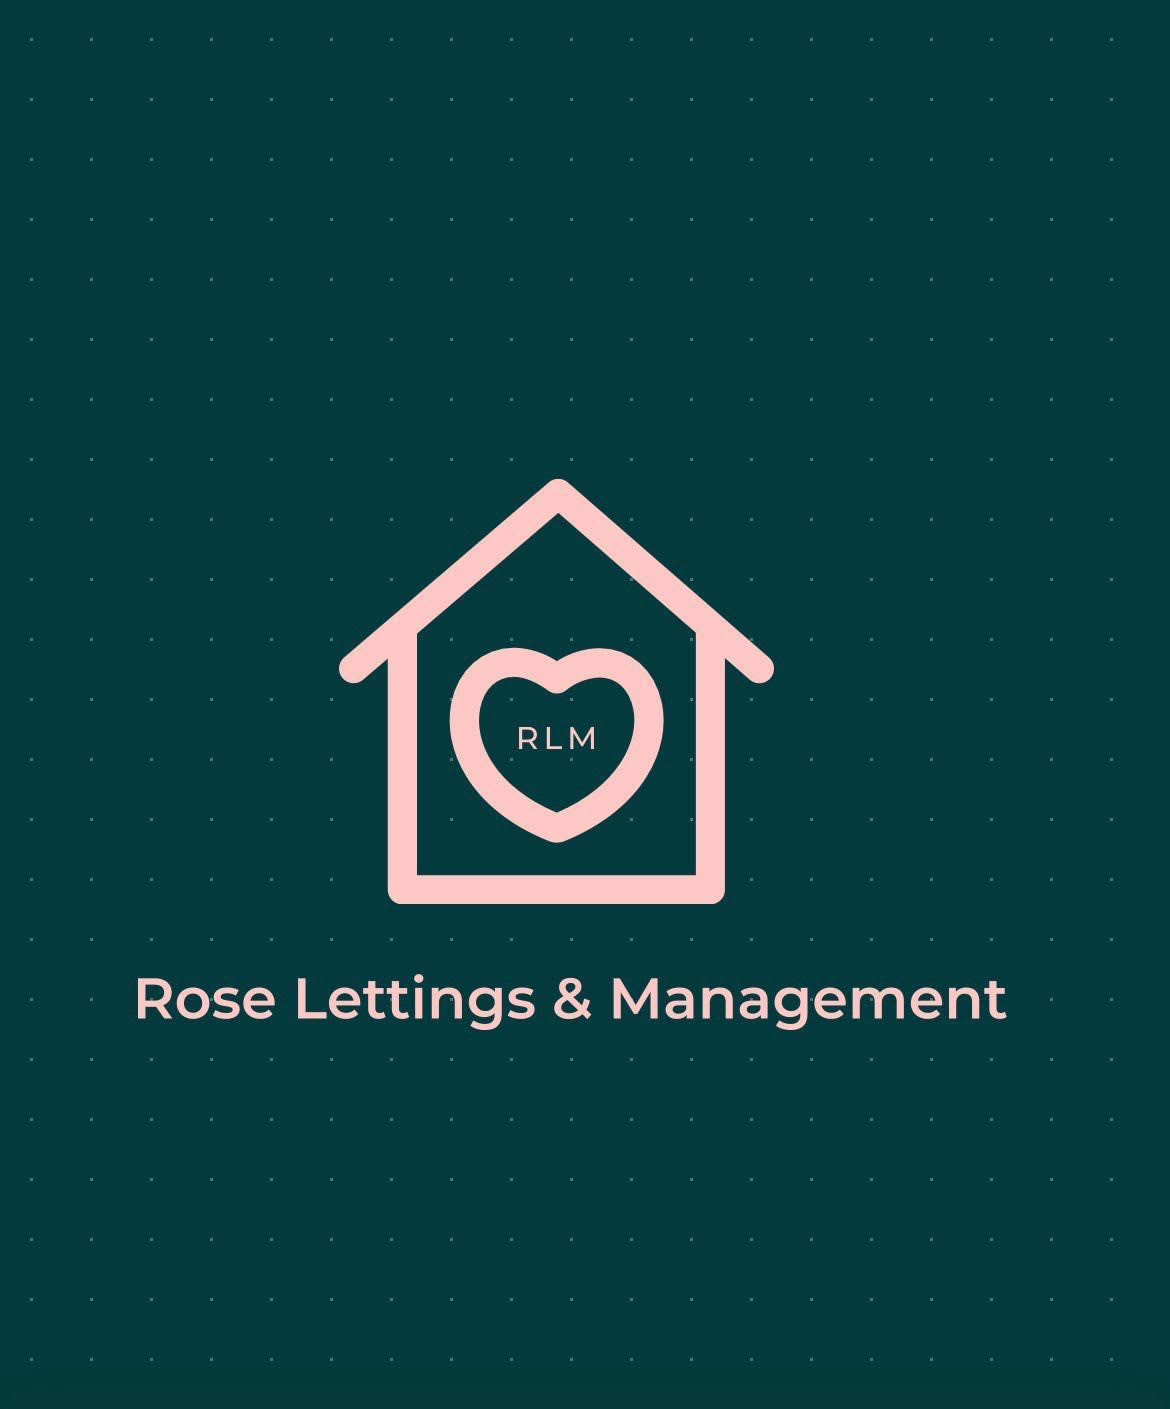 Logo for Rose lettings and management